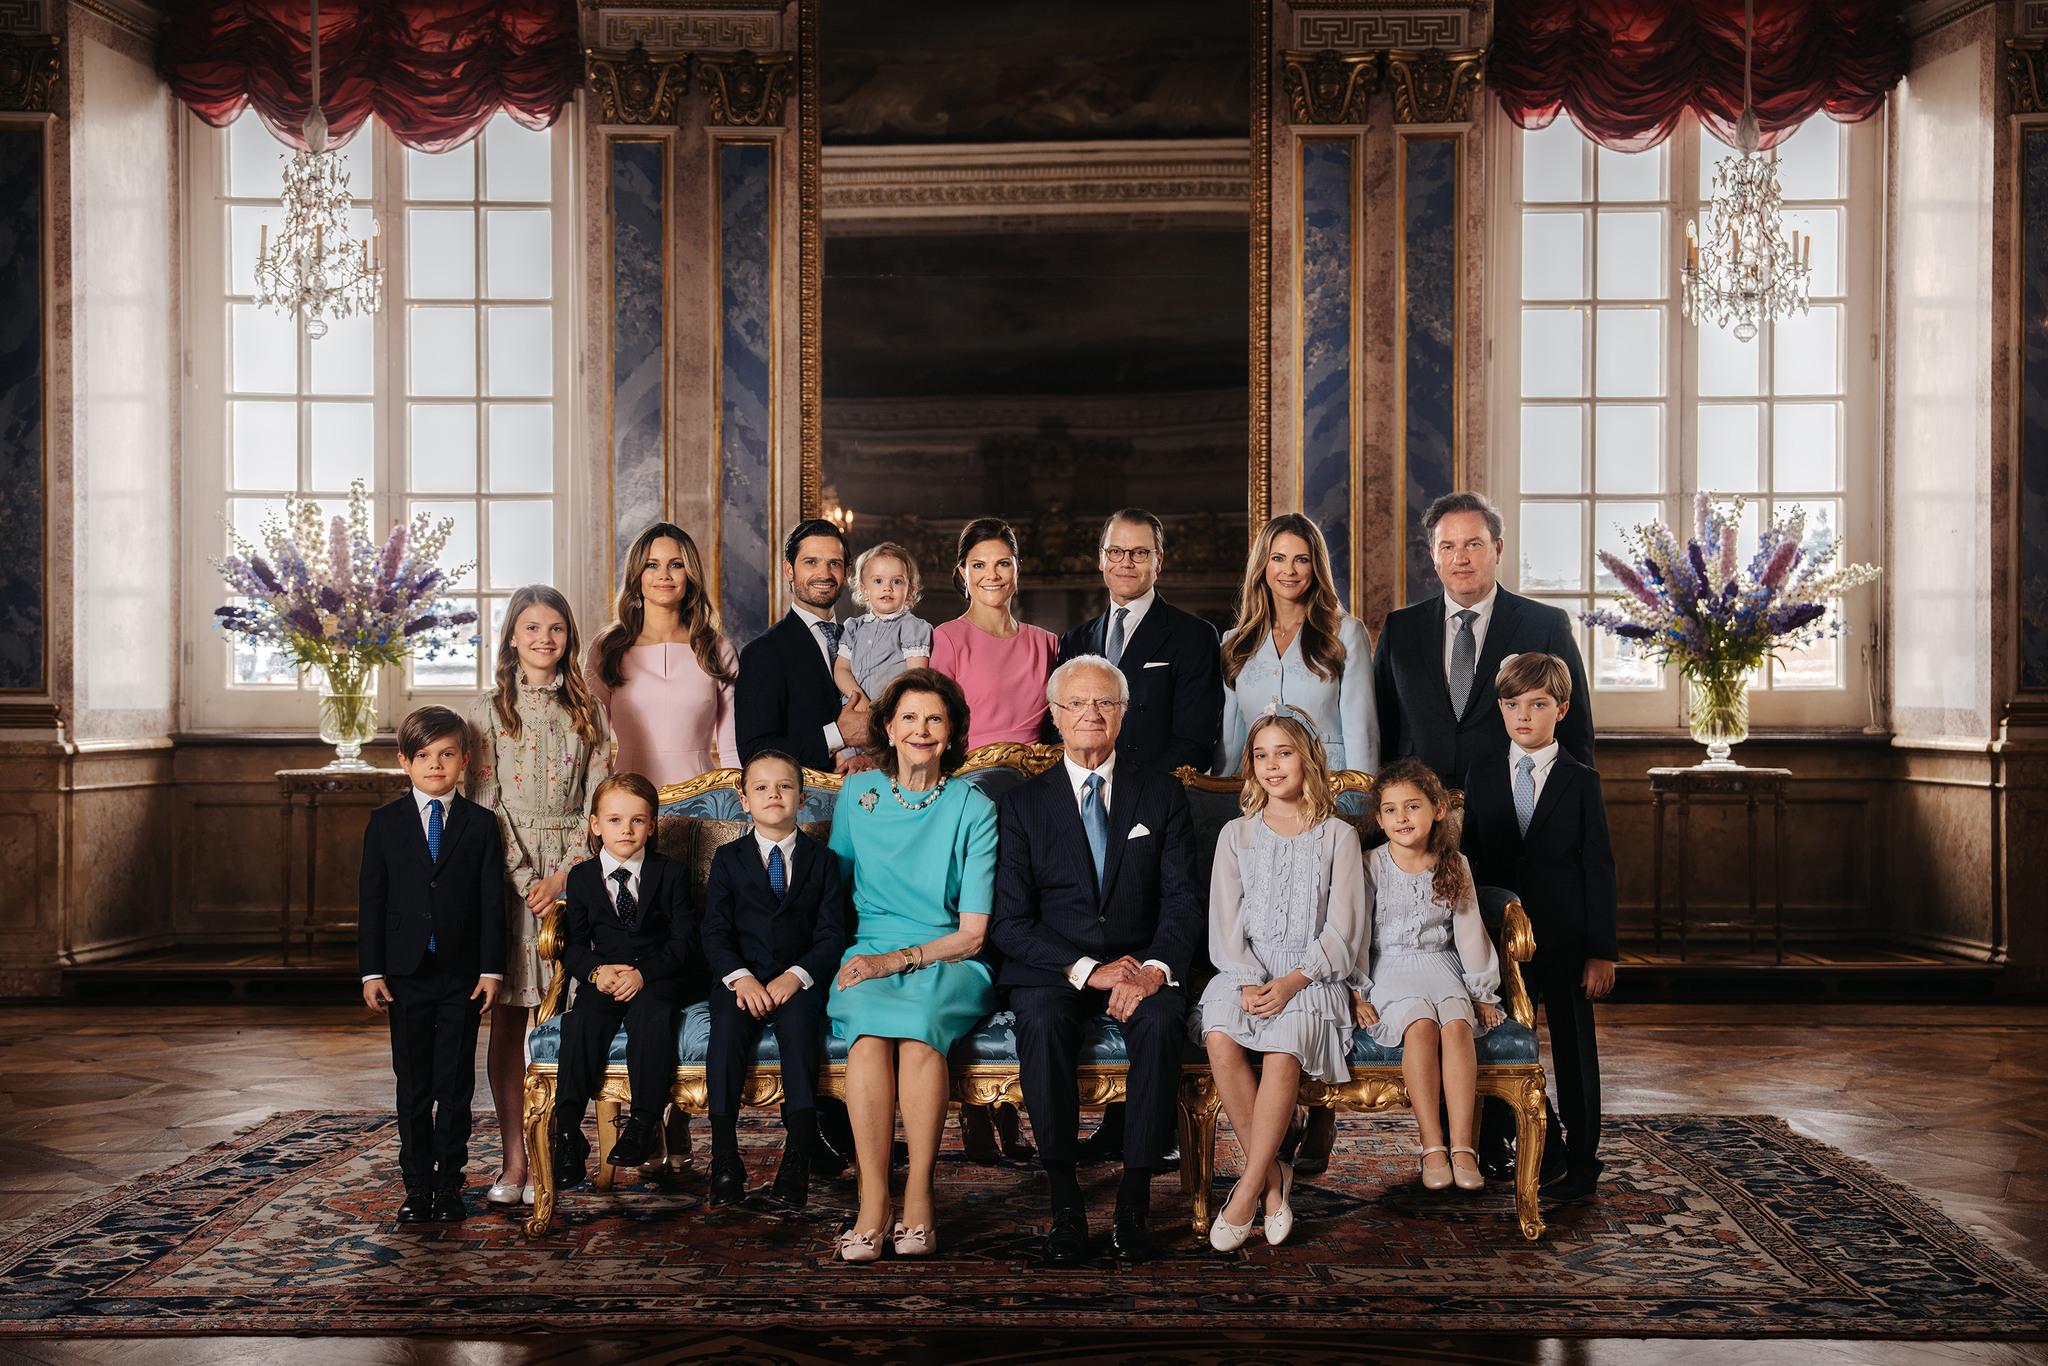 Group photo of the Swedish royal family, some sitting some standing. Taken in a room at the Royal Palace in Stockholm.